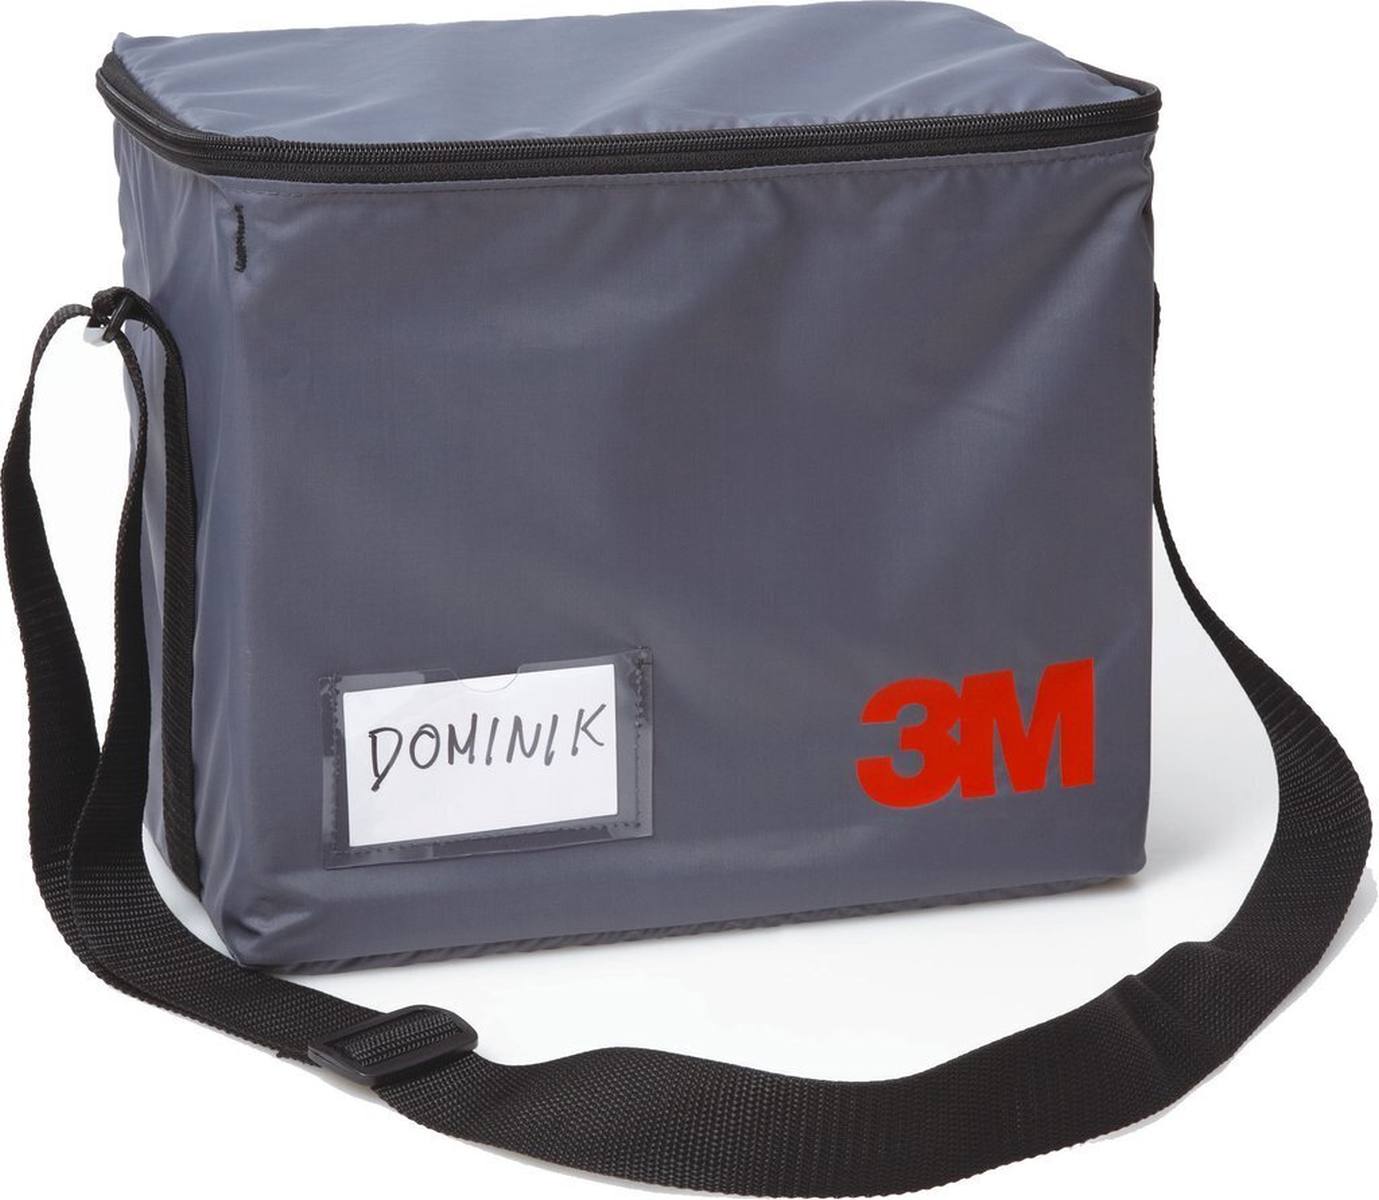 3M 107 Bag for full face masks for carrying and storing full face masks HxWxD: 280 mm x 320 mm x 190 mm